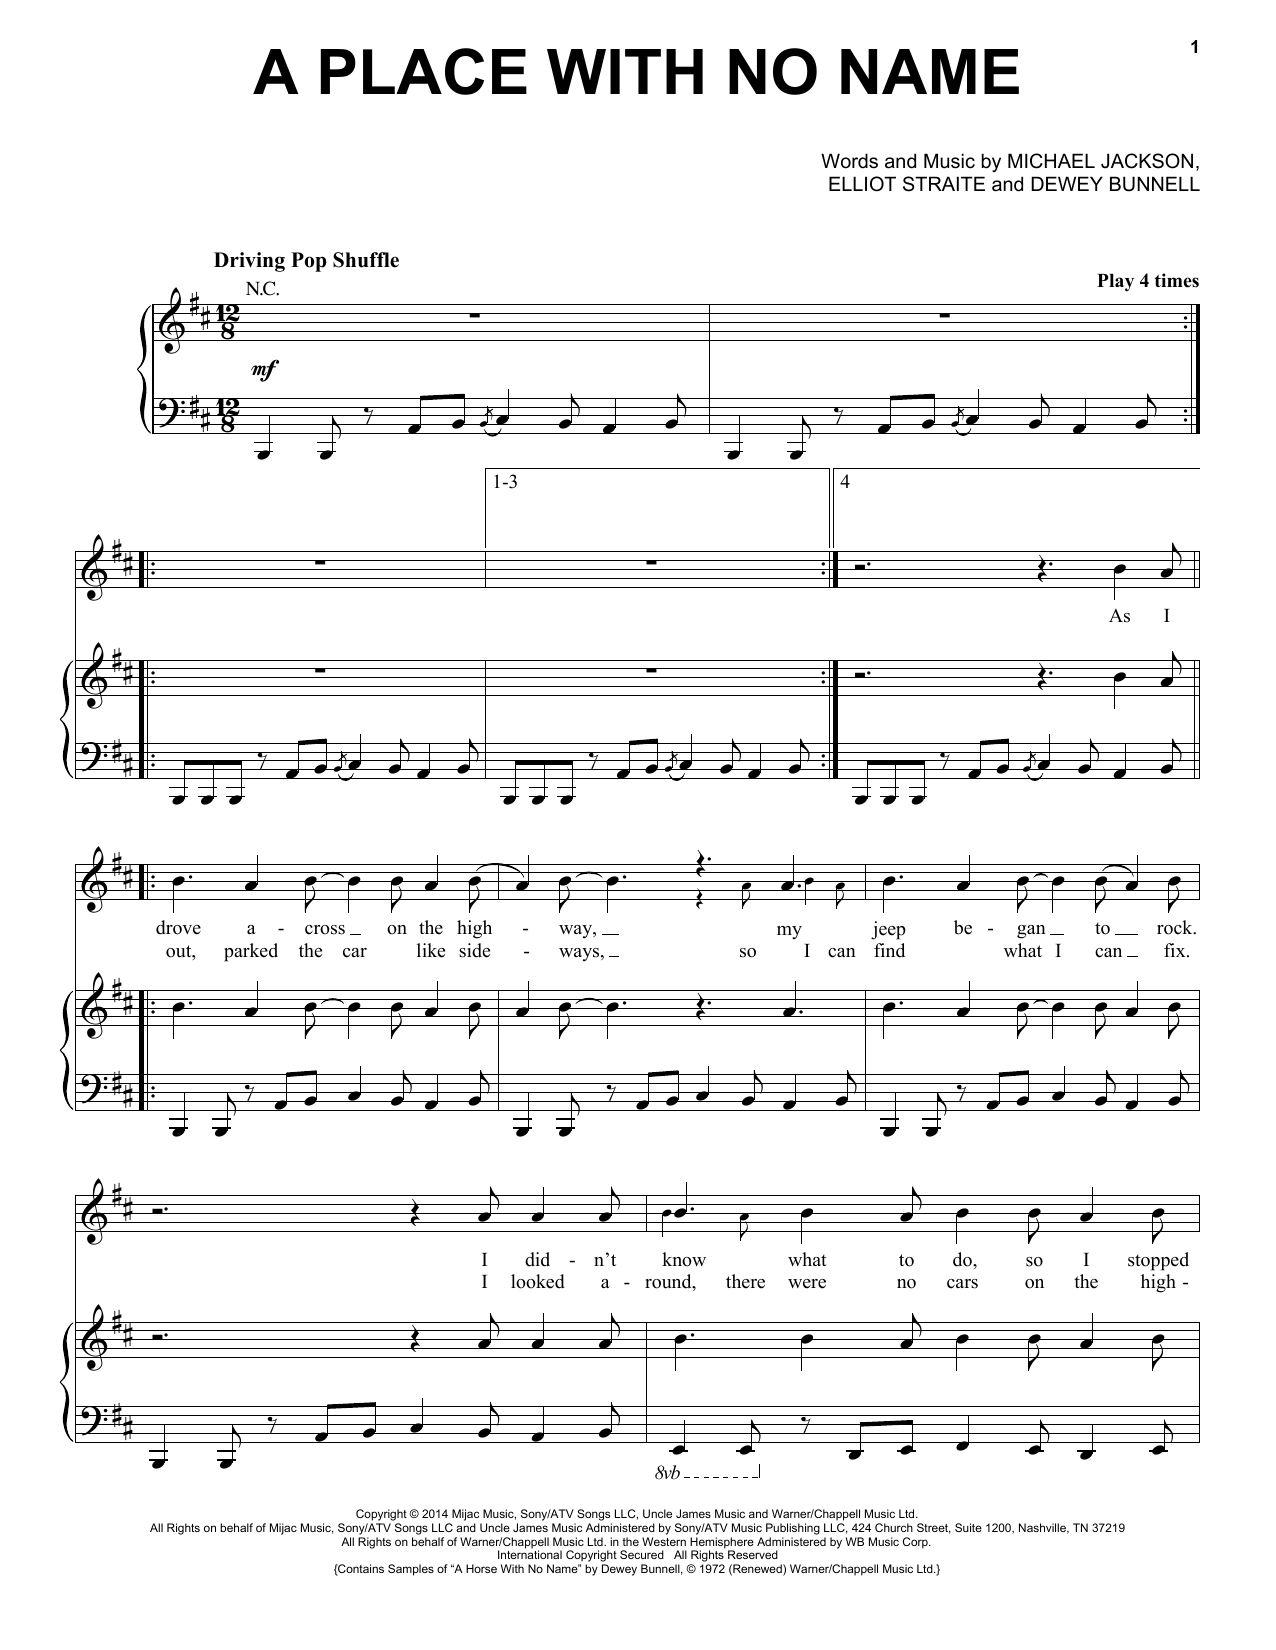 Download Michael Jackson A Place With No Name Sheet Music